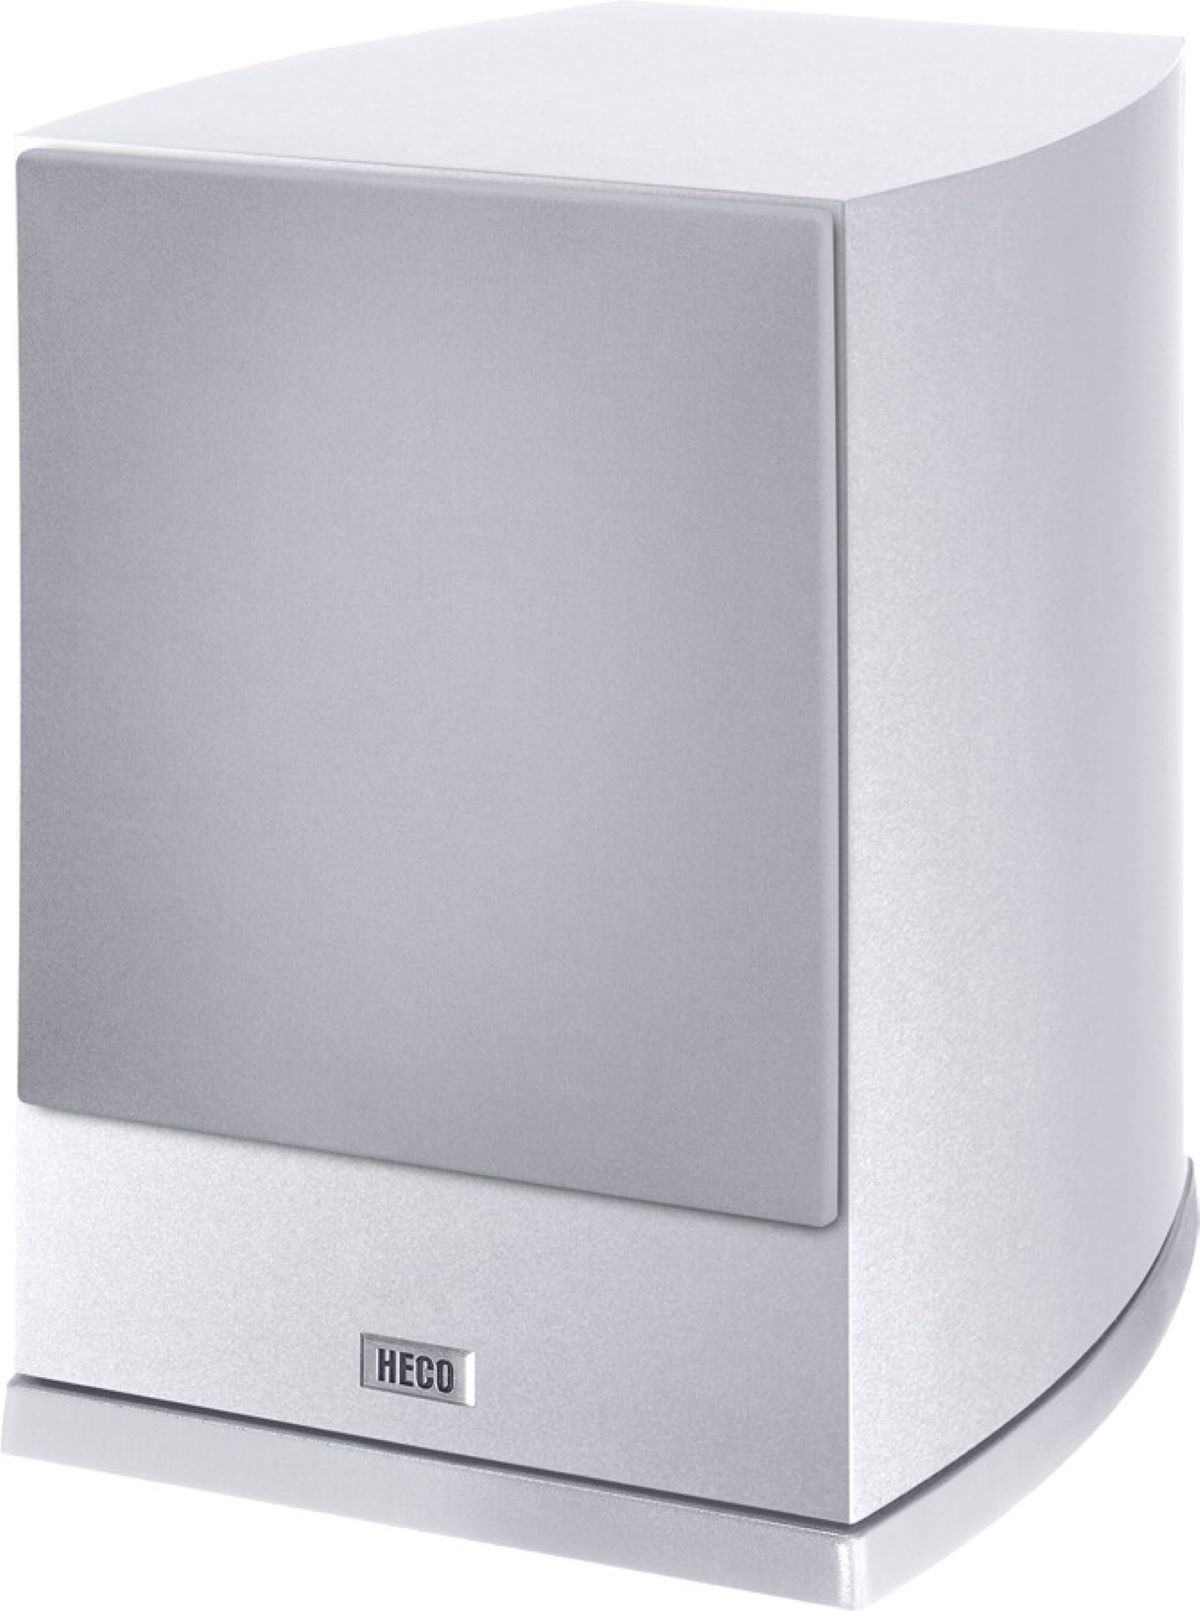 HECO VICTA SUB Subwoofer, ELITE weiss 252A